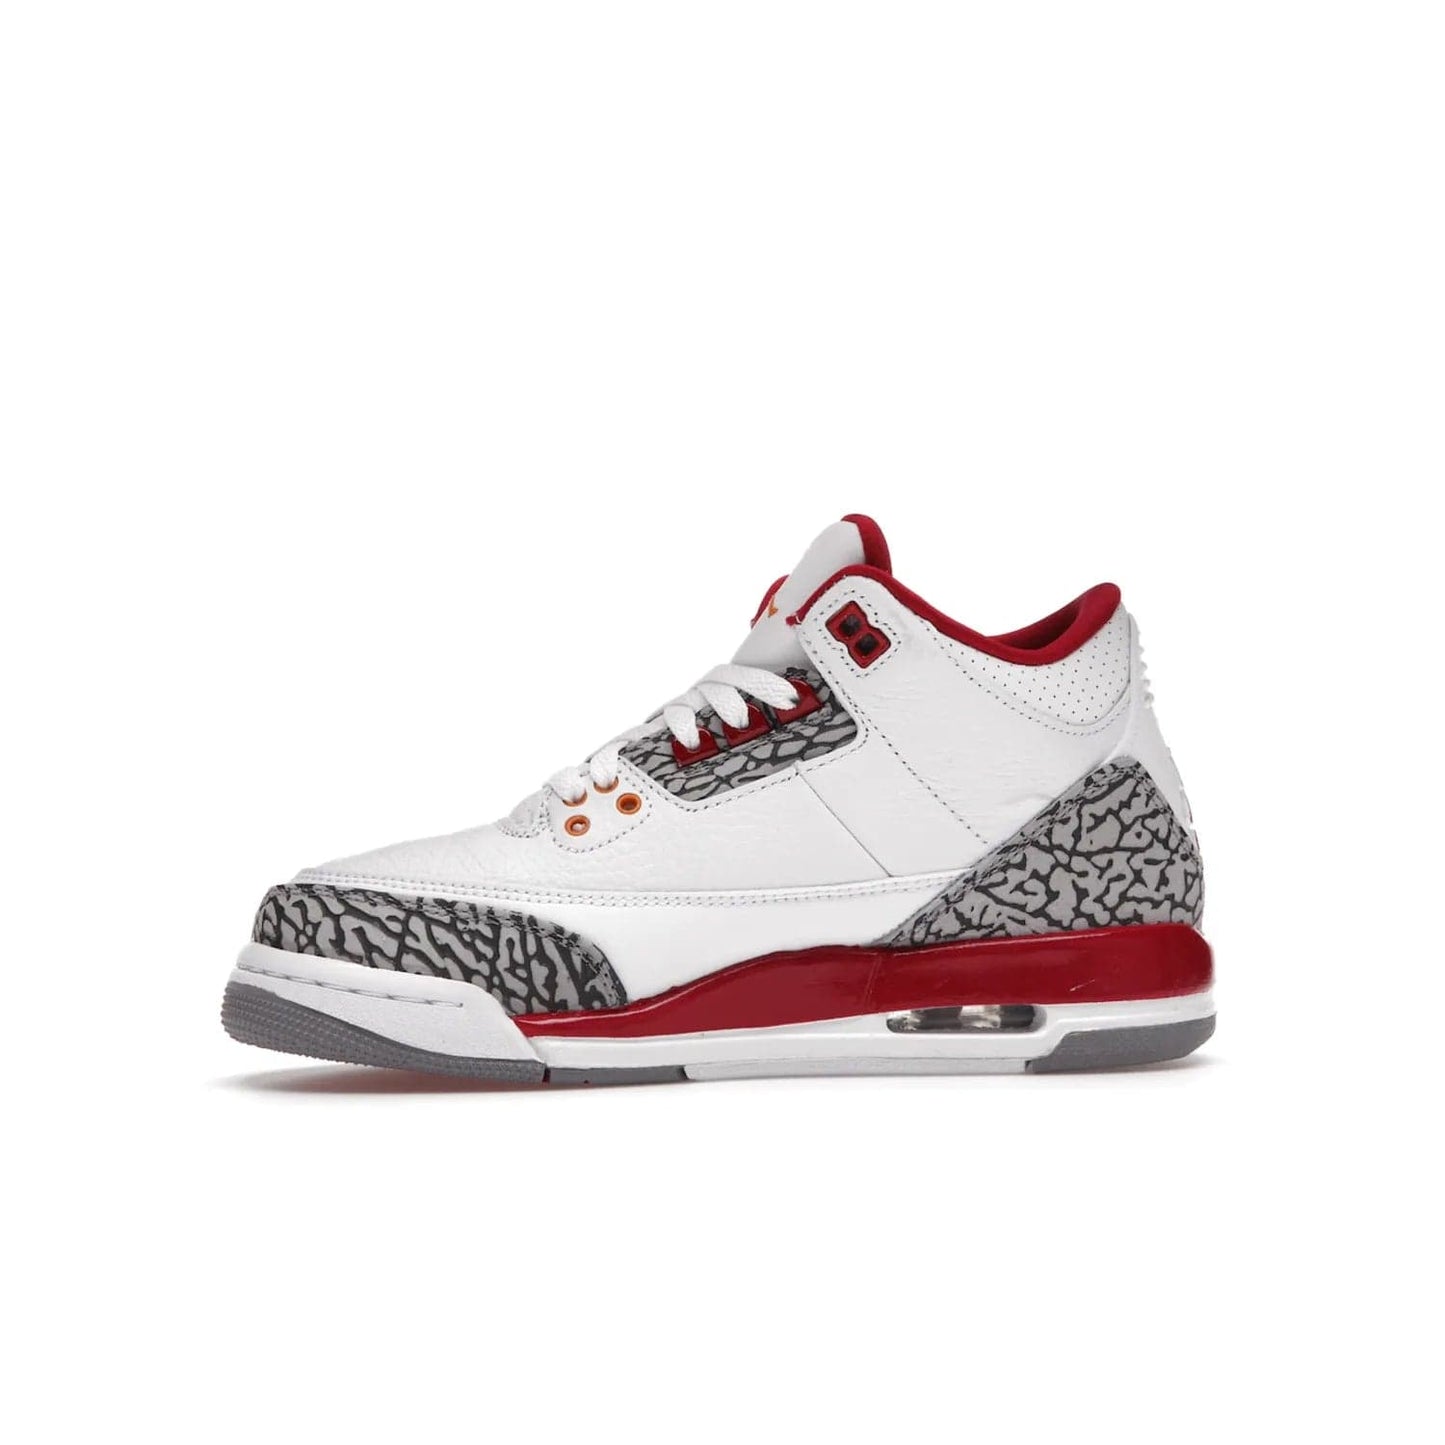 Jordan 3 Retro Cardinal (GS) - Image 18 - Only at www.BallersClubKickz.com - Shop the kid-sized Air Jordan 3 Retro Cardinal GS, released Feb 2022. White tumbled leather upper, light curry accenting, cement grey and classic red details throughout. Visible Air cushioning, midsole, and an eye-catching outsole. Show off your style with this fashionable streetwear silhouette.